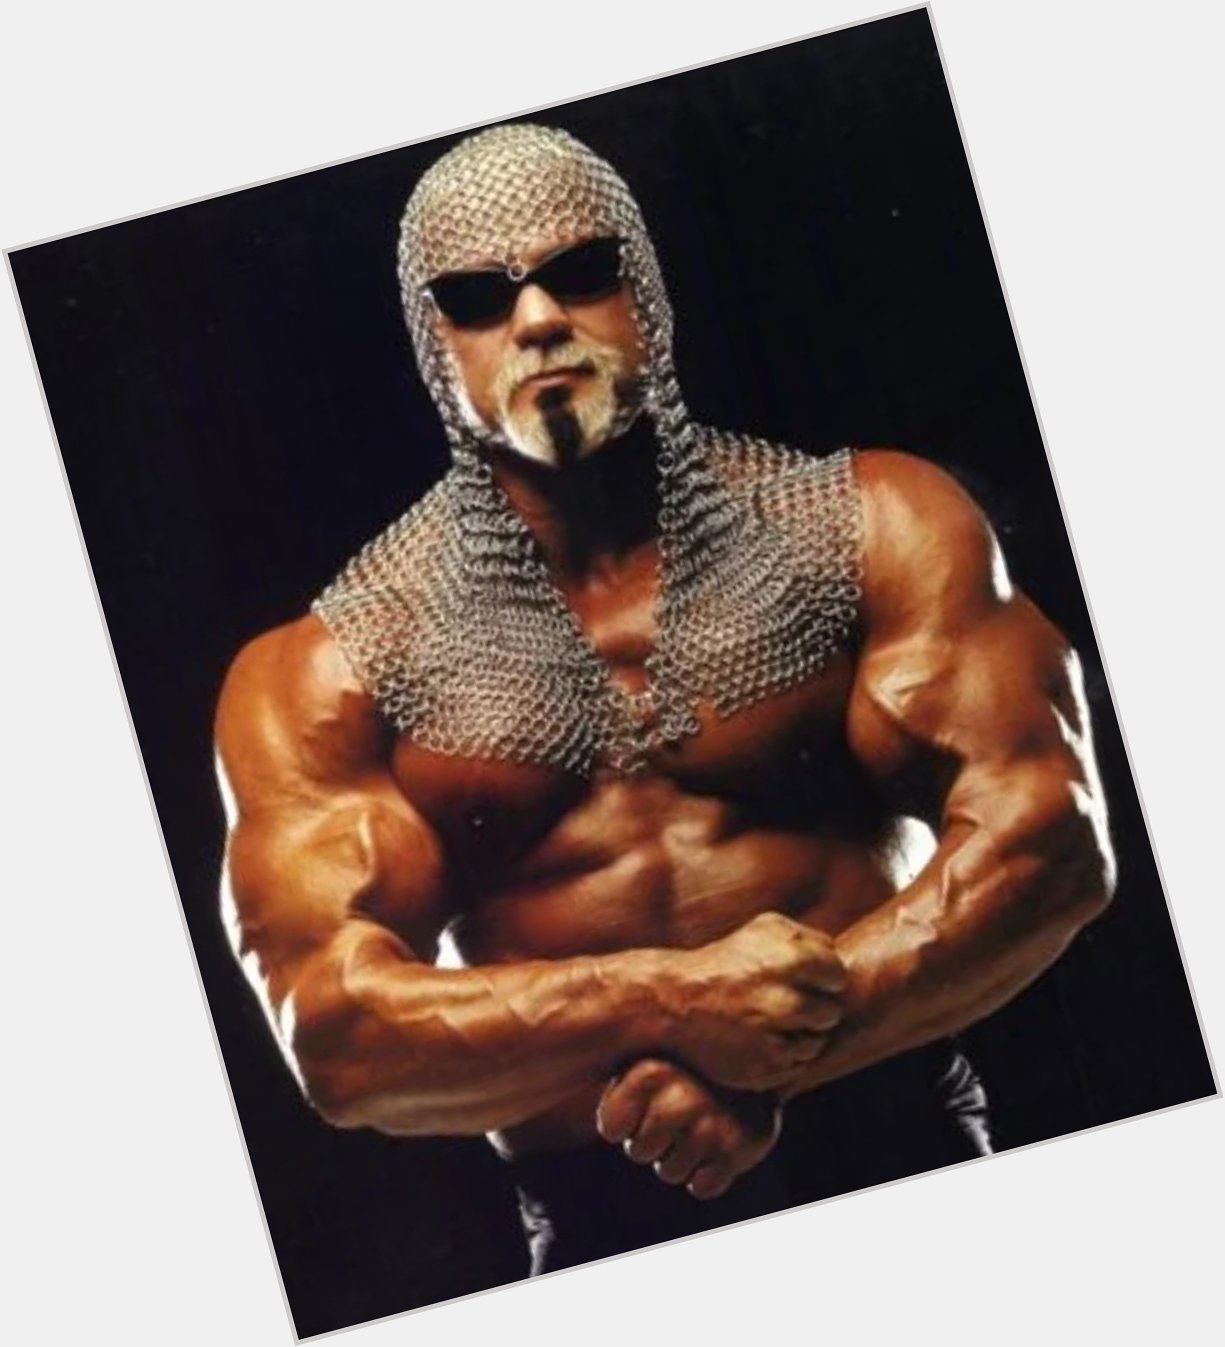 Happy Birthday to the man known as Big Poppa Pump Scott Steiner who turns 58 years old today. Enjoy your day Sir. 